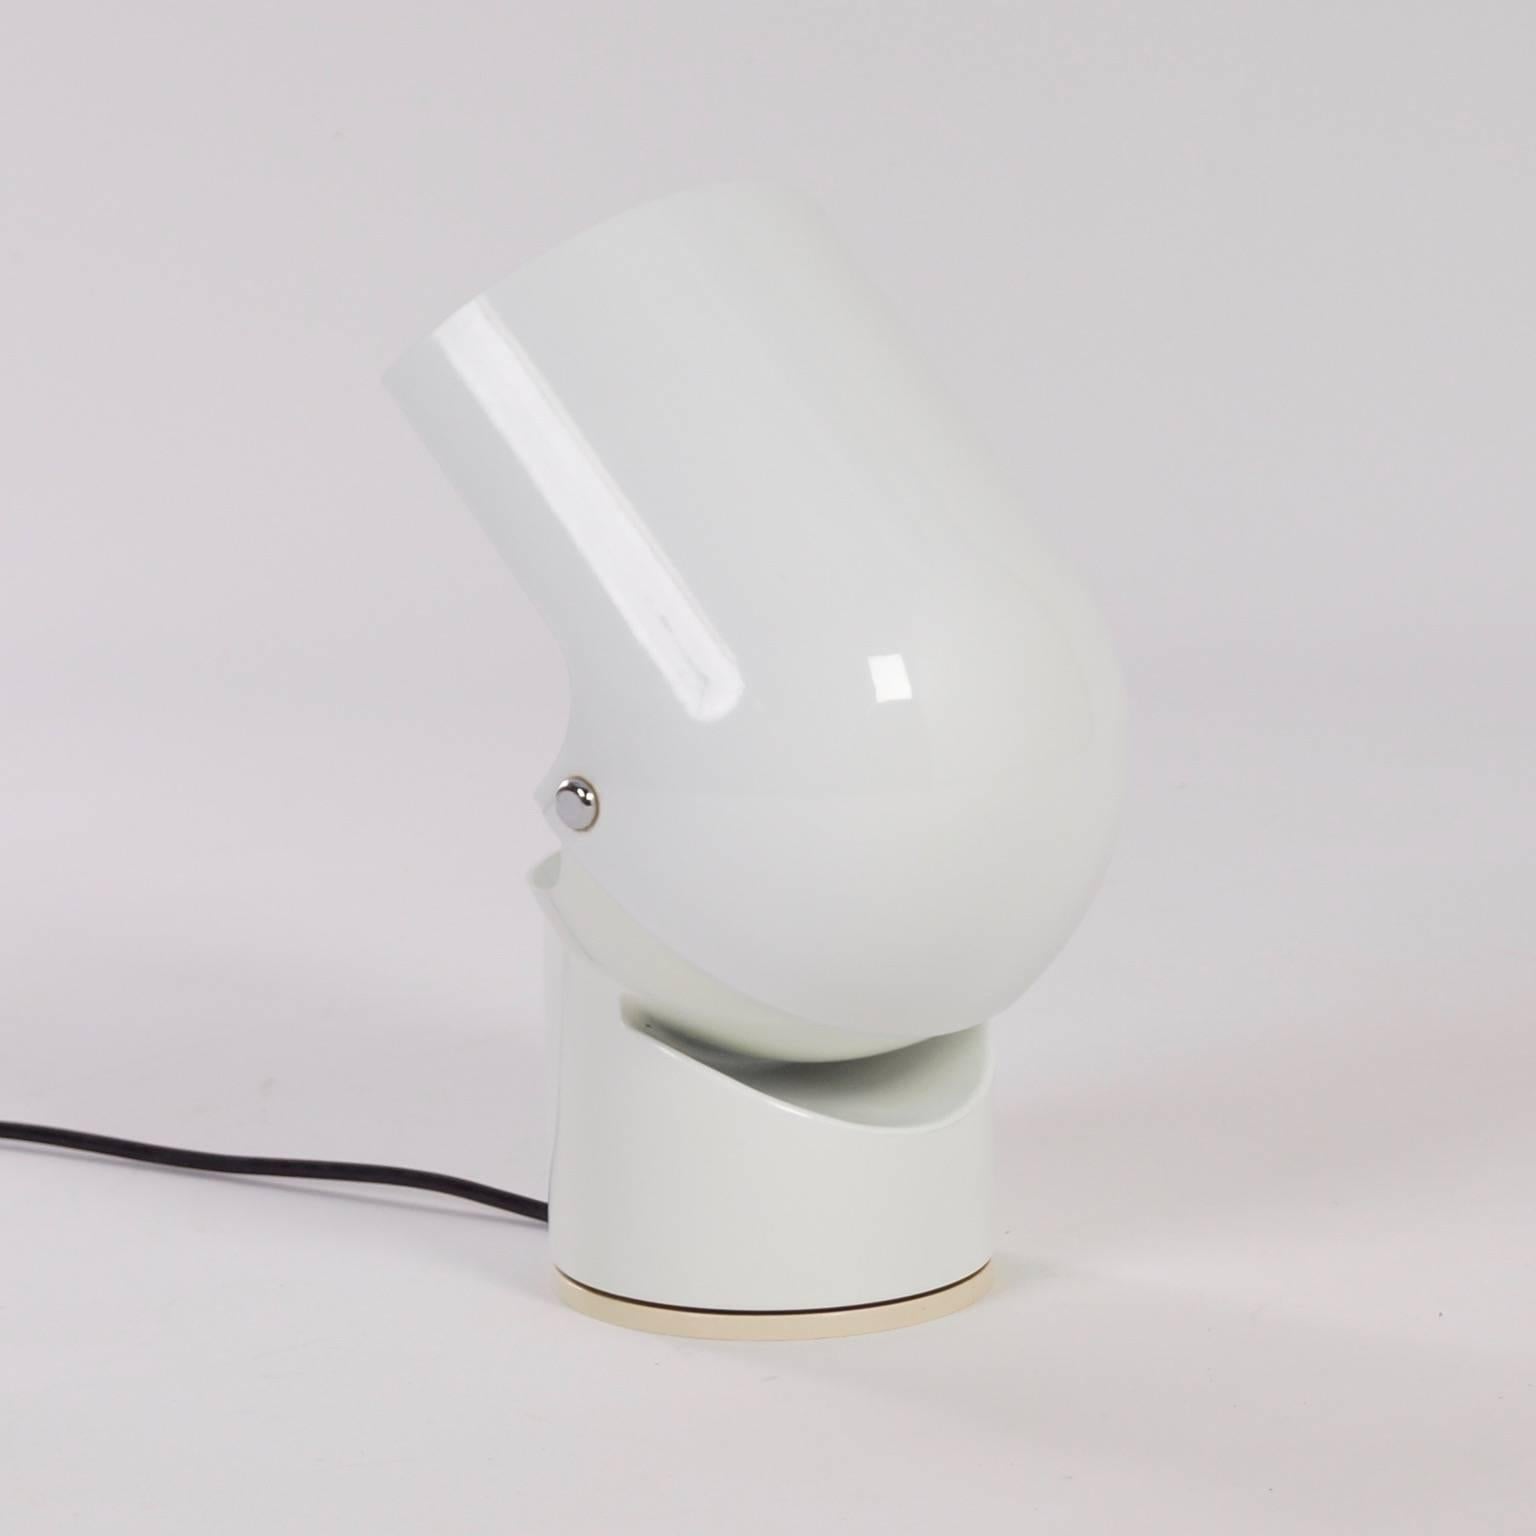 Artemide table lamp “Pileino” designed by Italian architect and designer Gae Aulenti (1927-2012) in 1972. The lamp is adjustable for indirect en direct lighting. Considering the age, this vintage lamp in very good original condition, small spot on